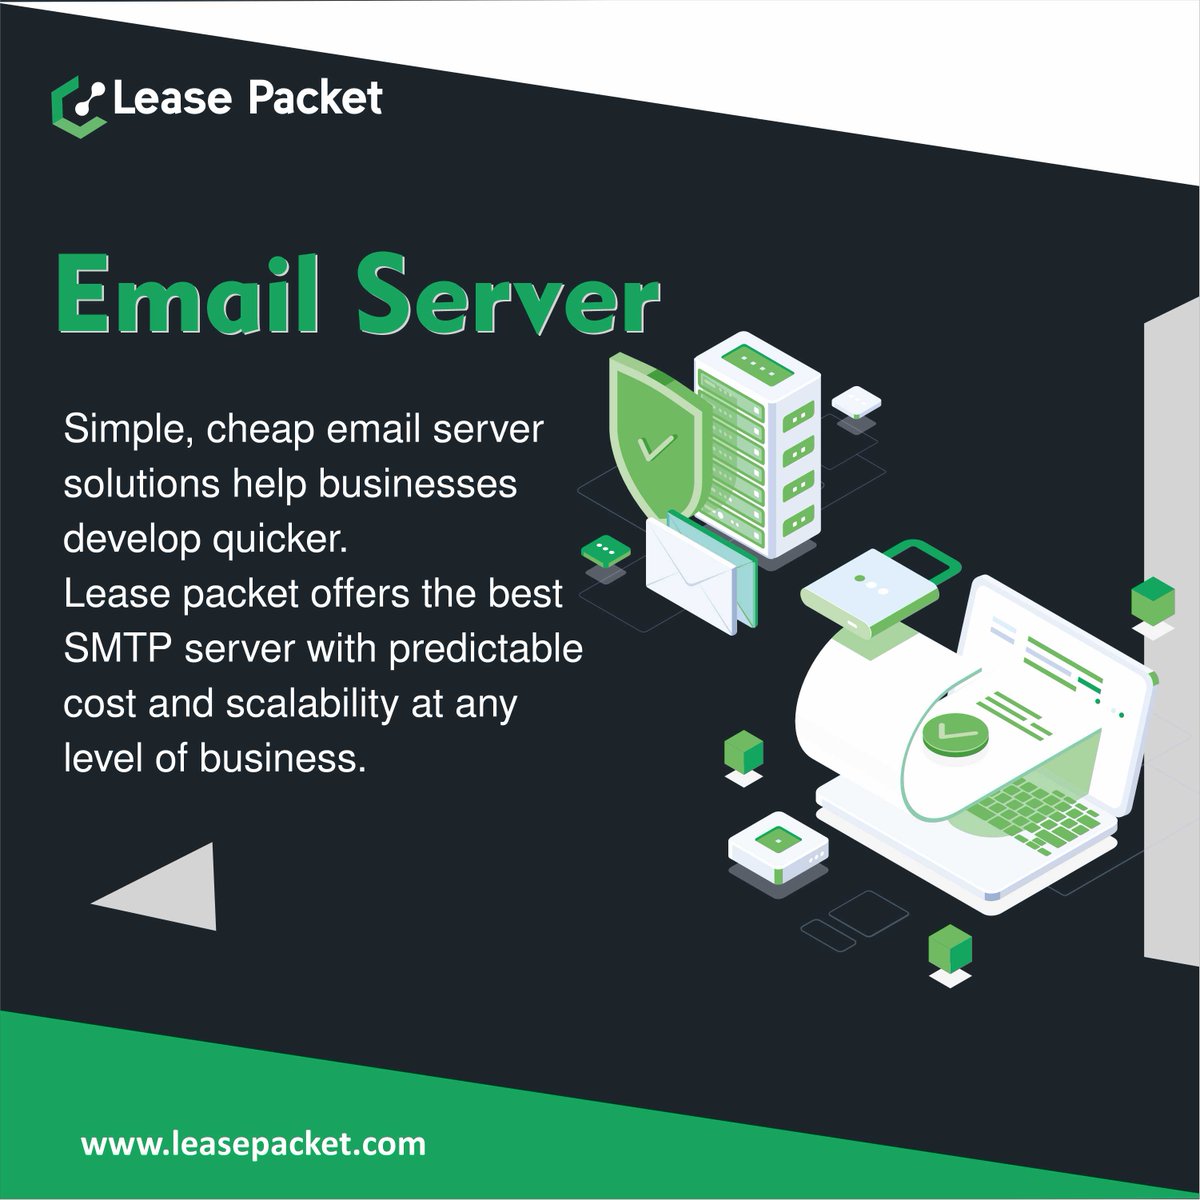 Take control of your communication with Lease Packet's Email Server solutions. Customizable, secure, and ready to scale with your business. Start sending with confidence today! 
#emailserver #server #email #mail #serverprovider #emailserverprovider #mailserver #leasepacket